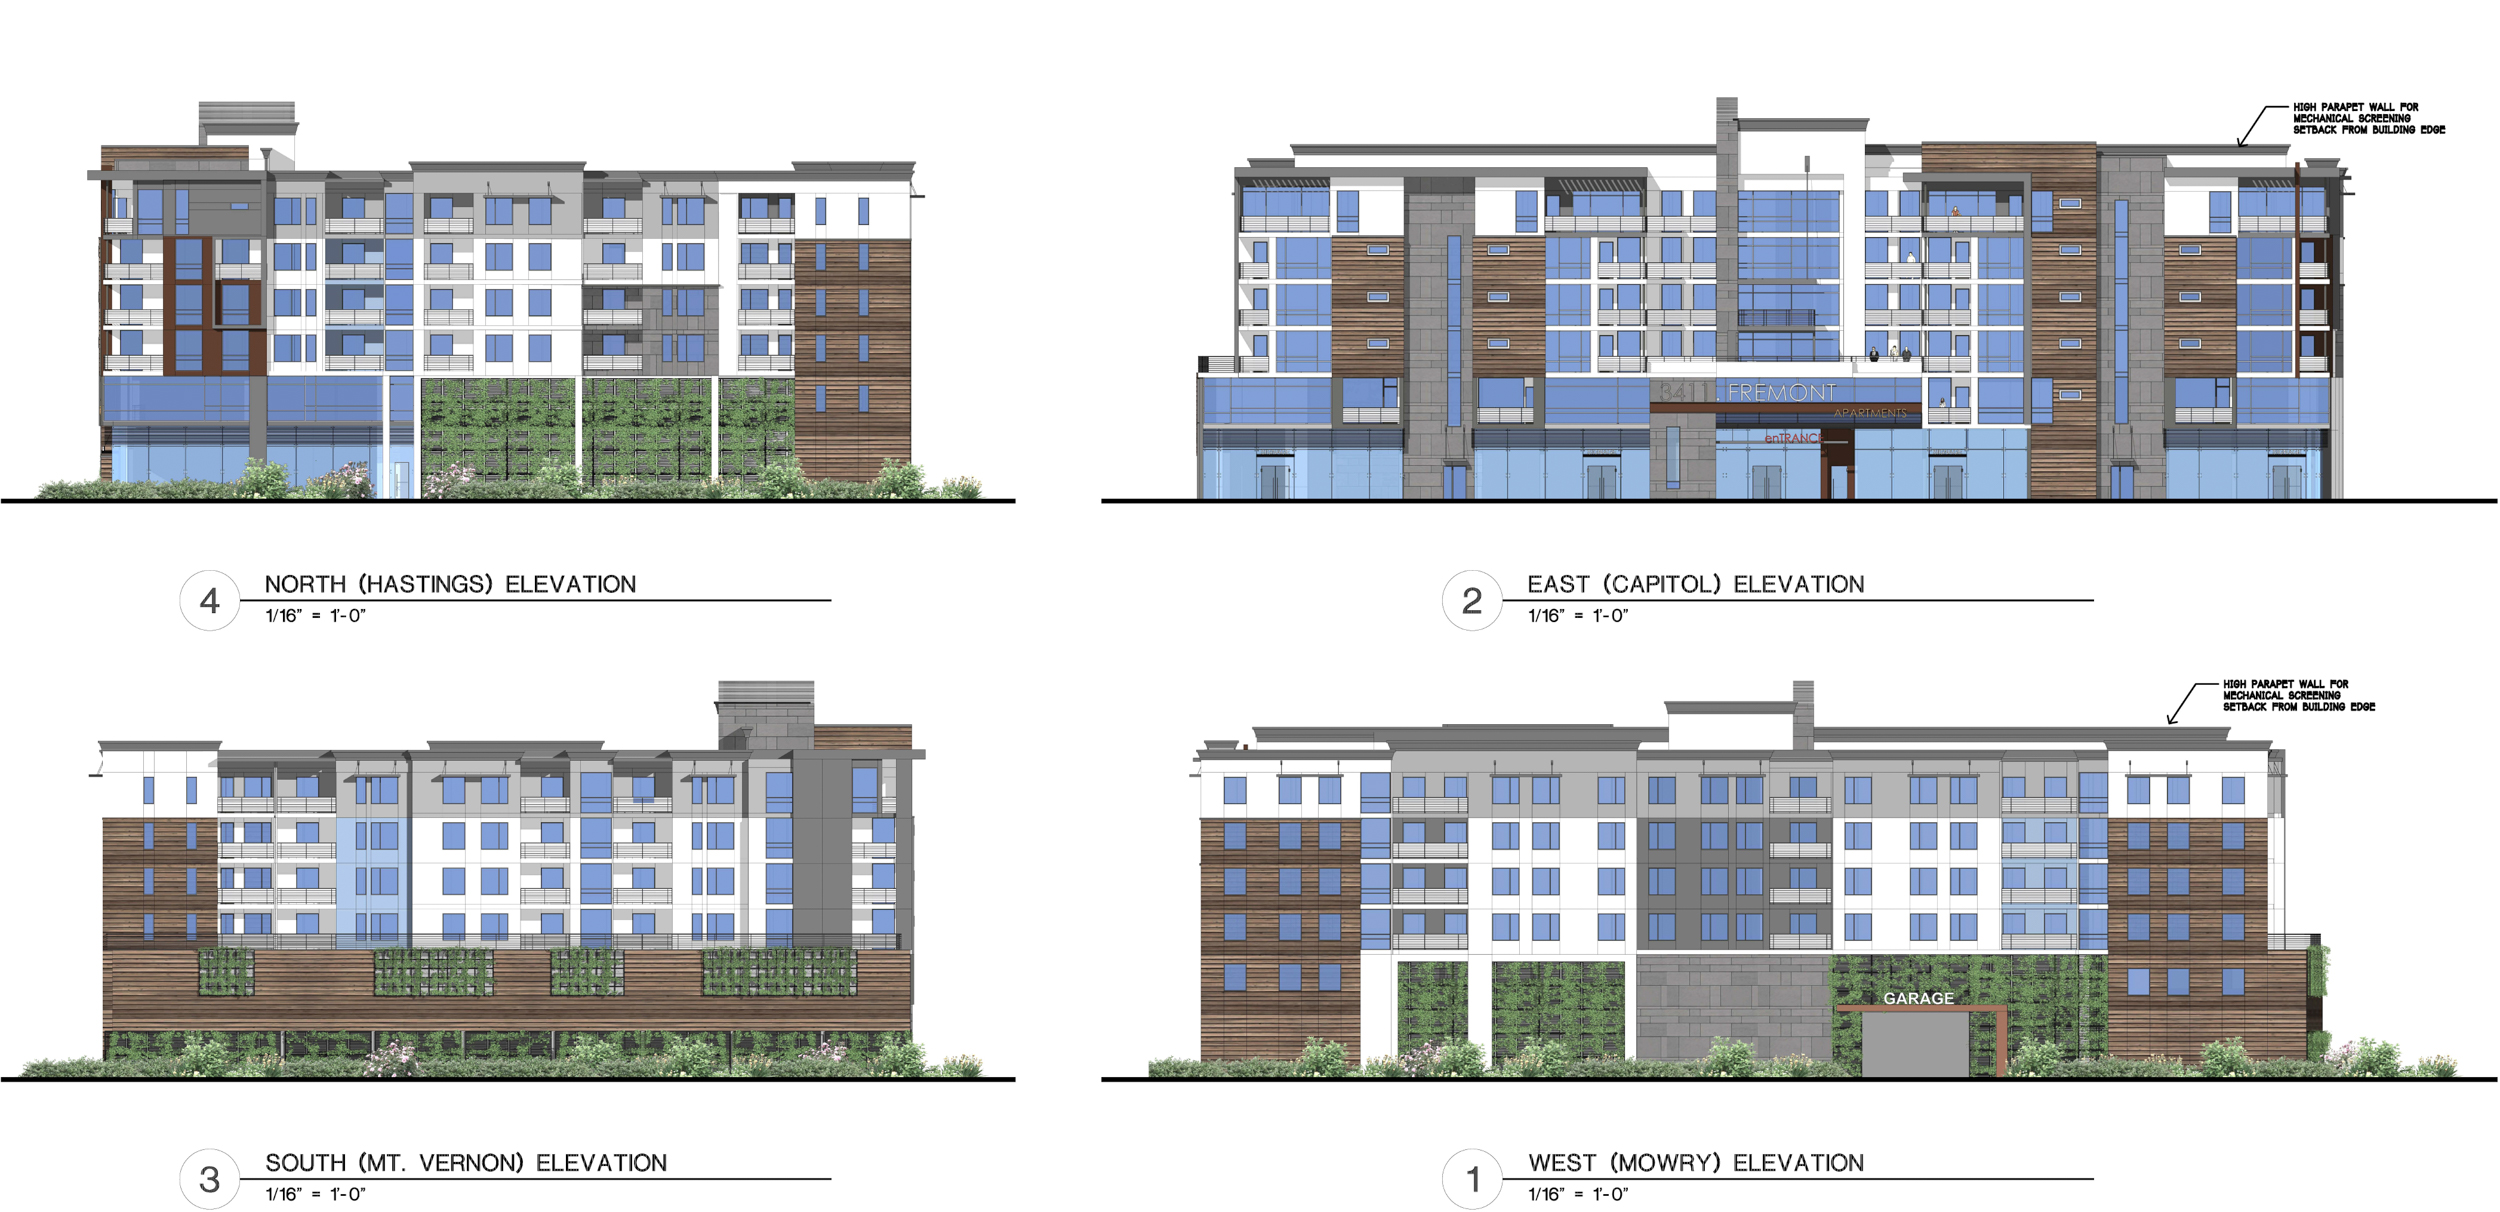 3411 Capitol Avenue facade elevation, rendering by LPMD Architects